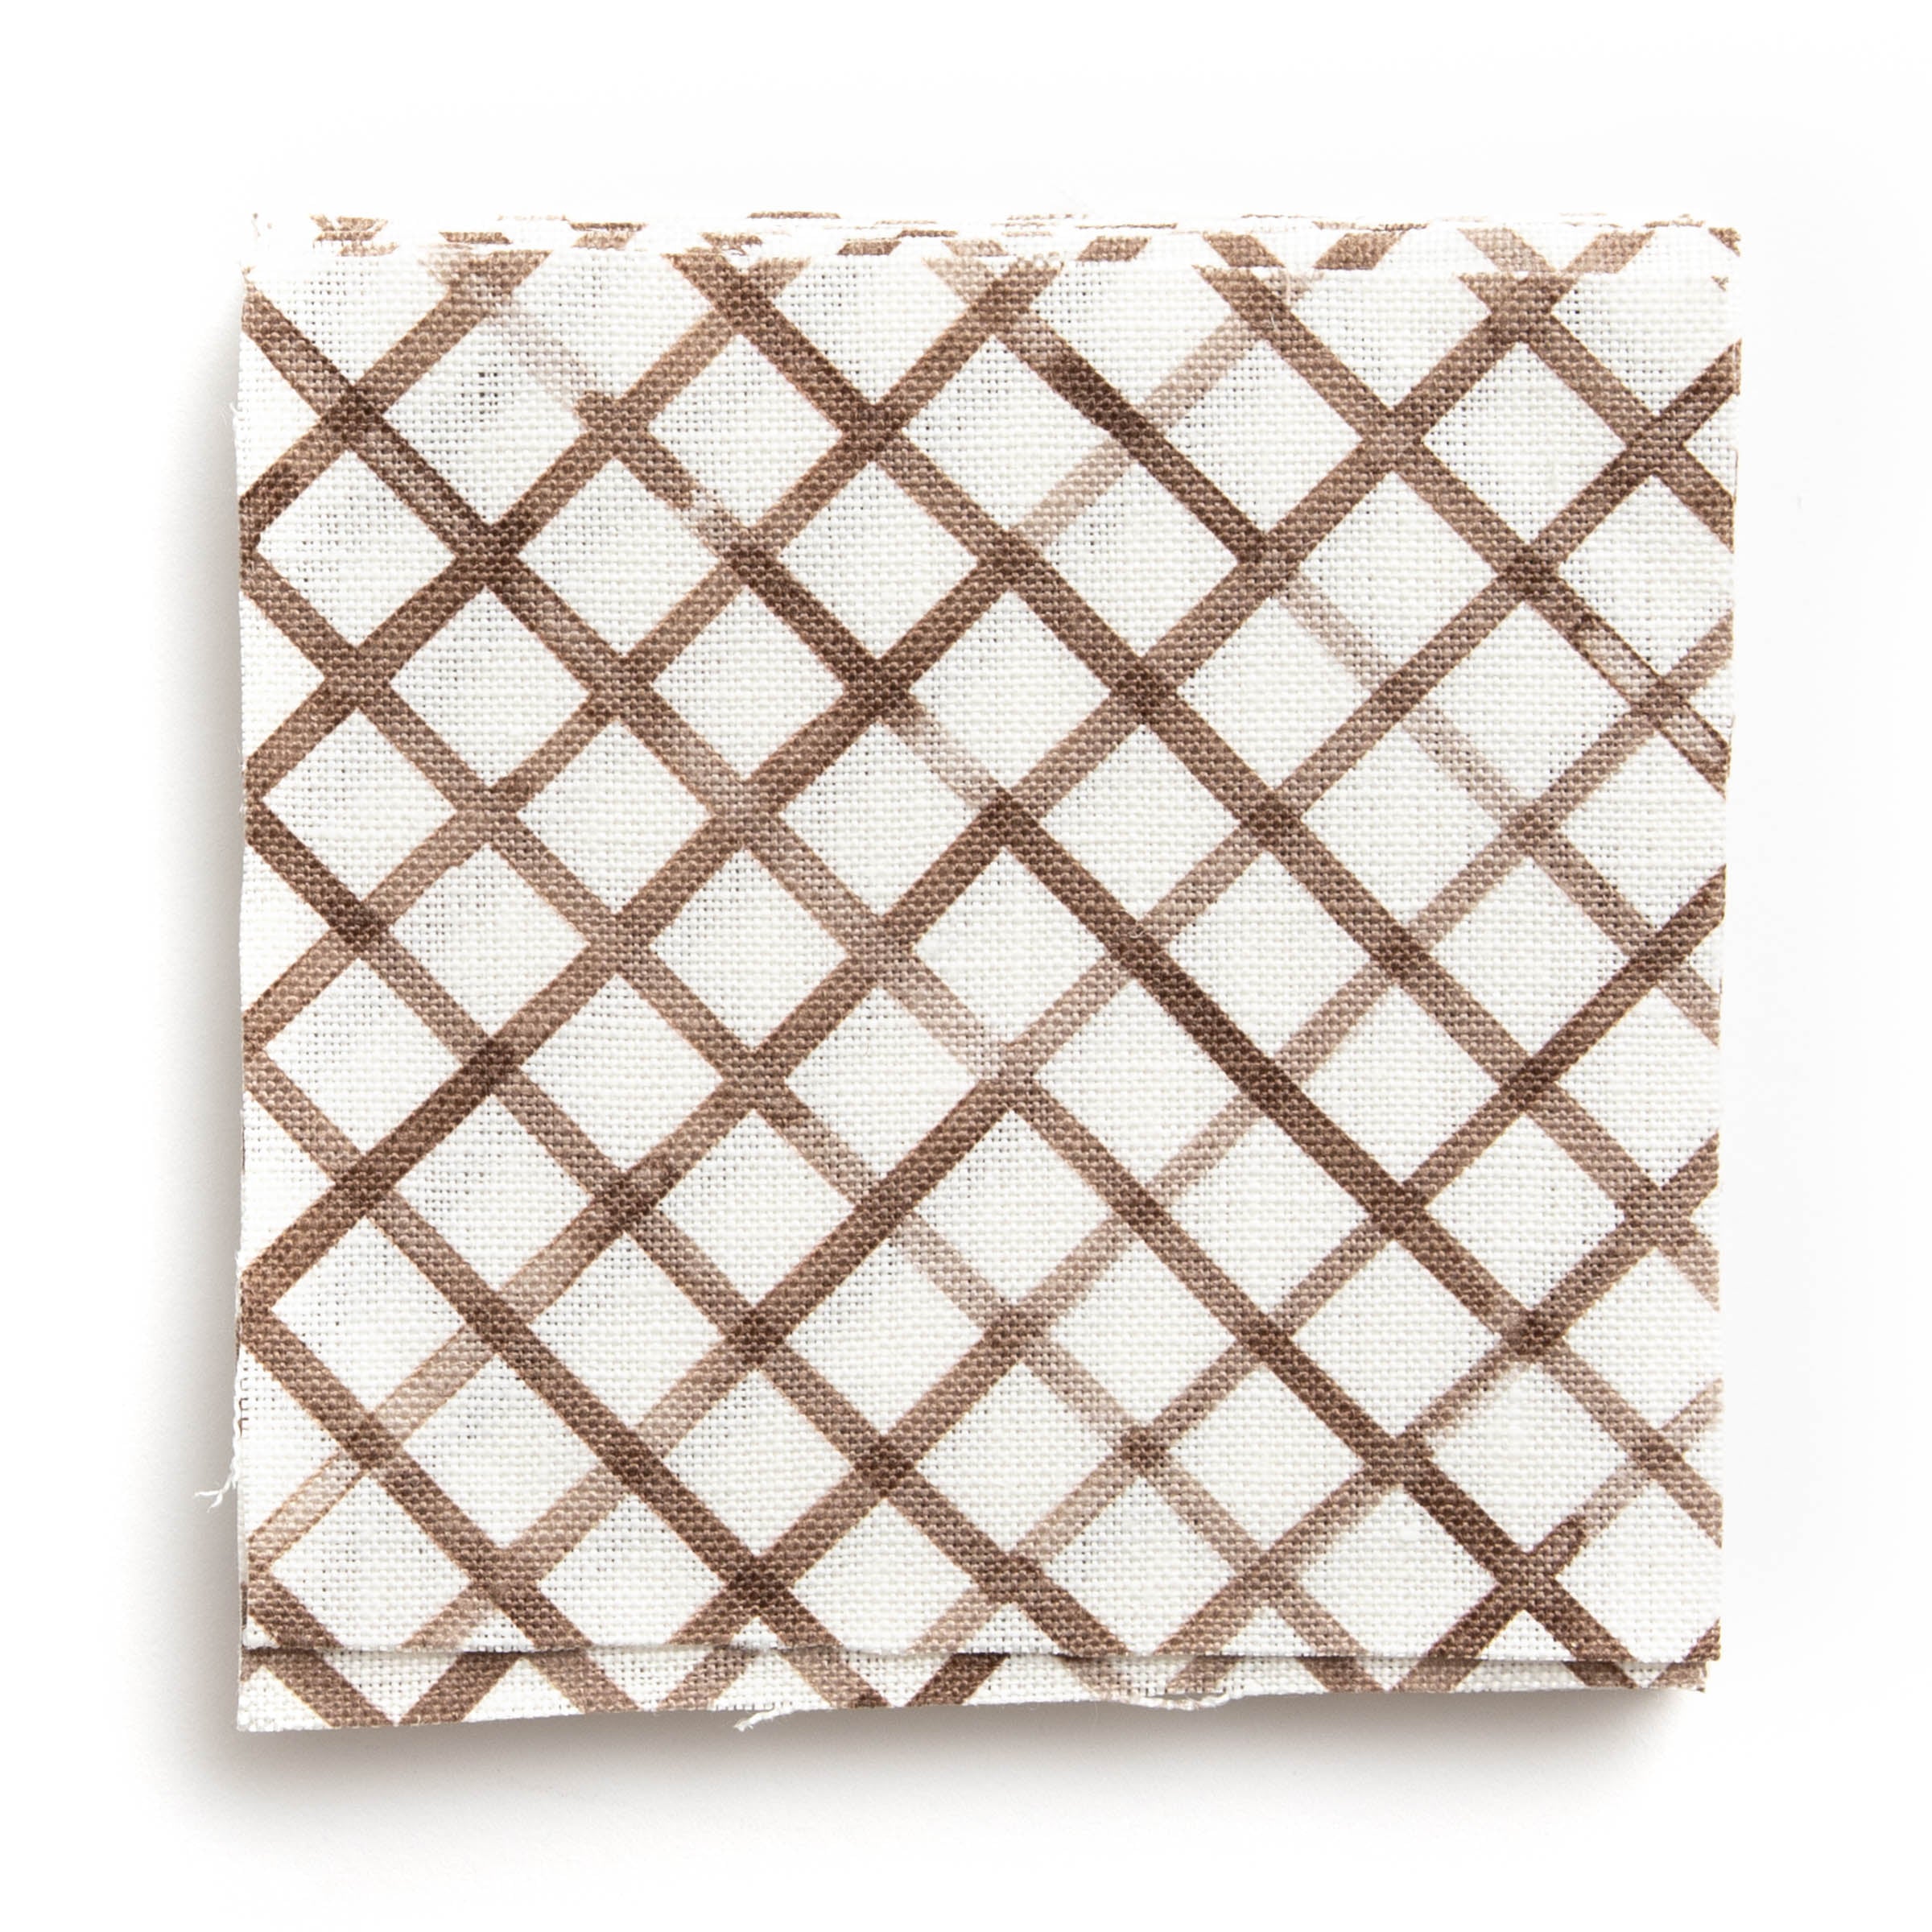 A stack of fabric swatches in a painterly grid pattern in brown on a white field.